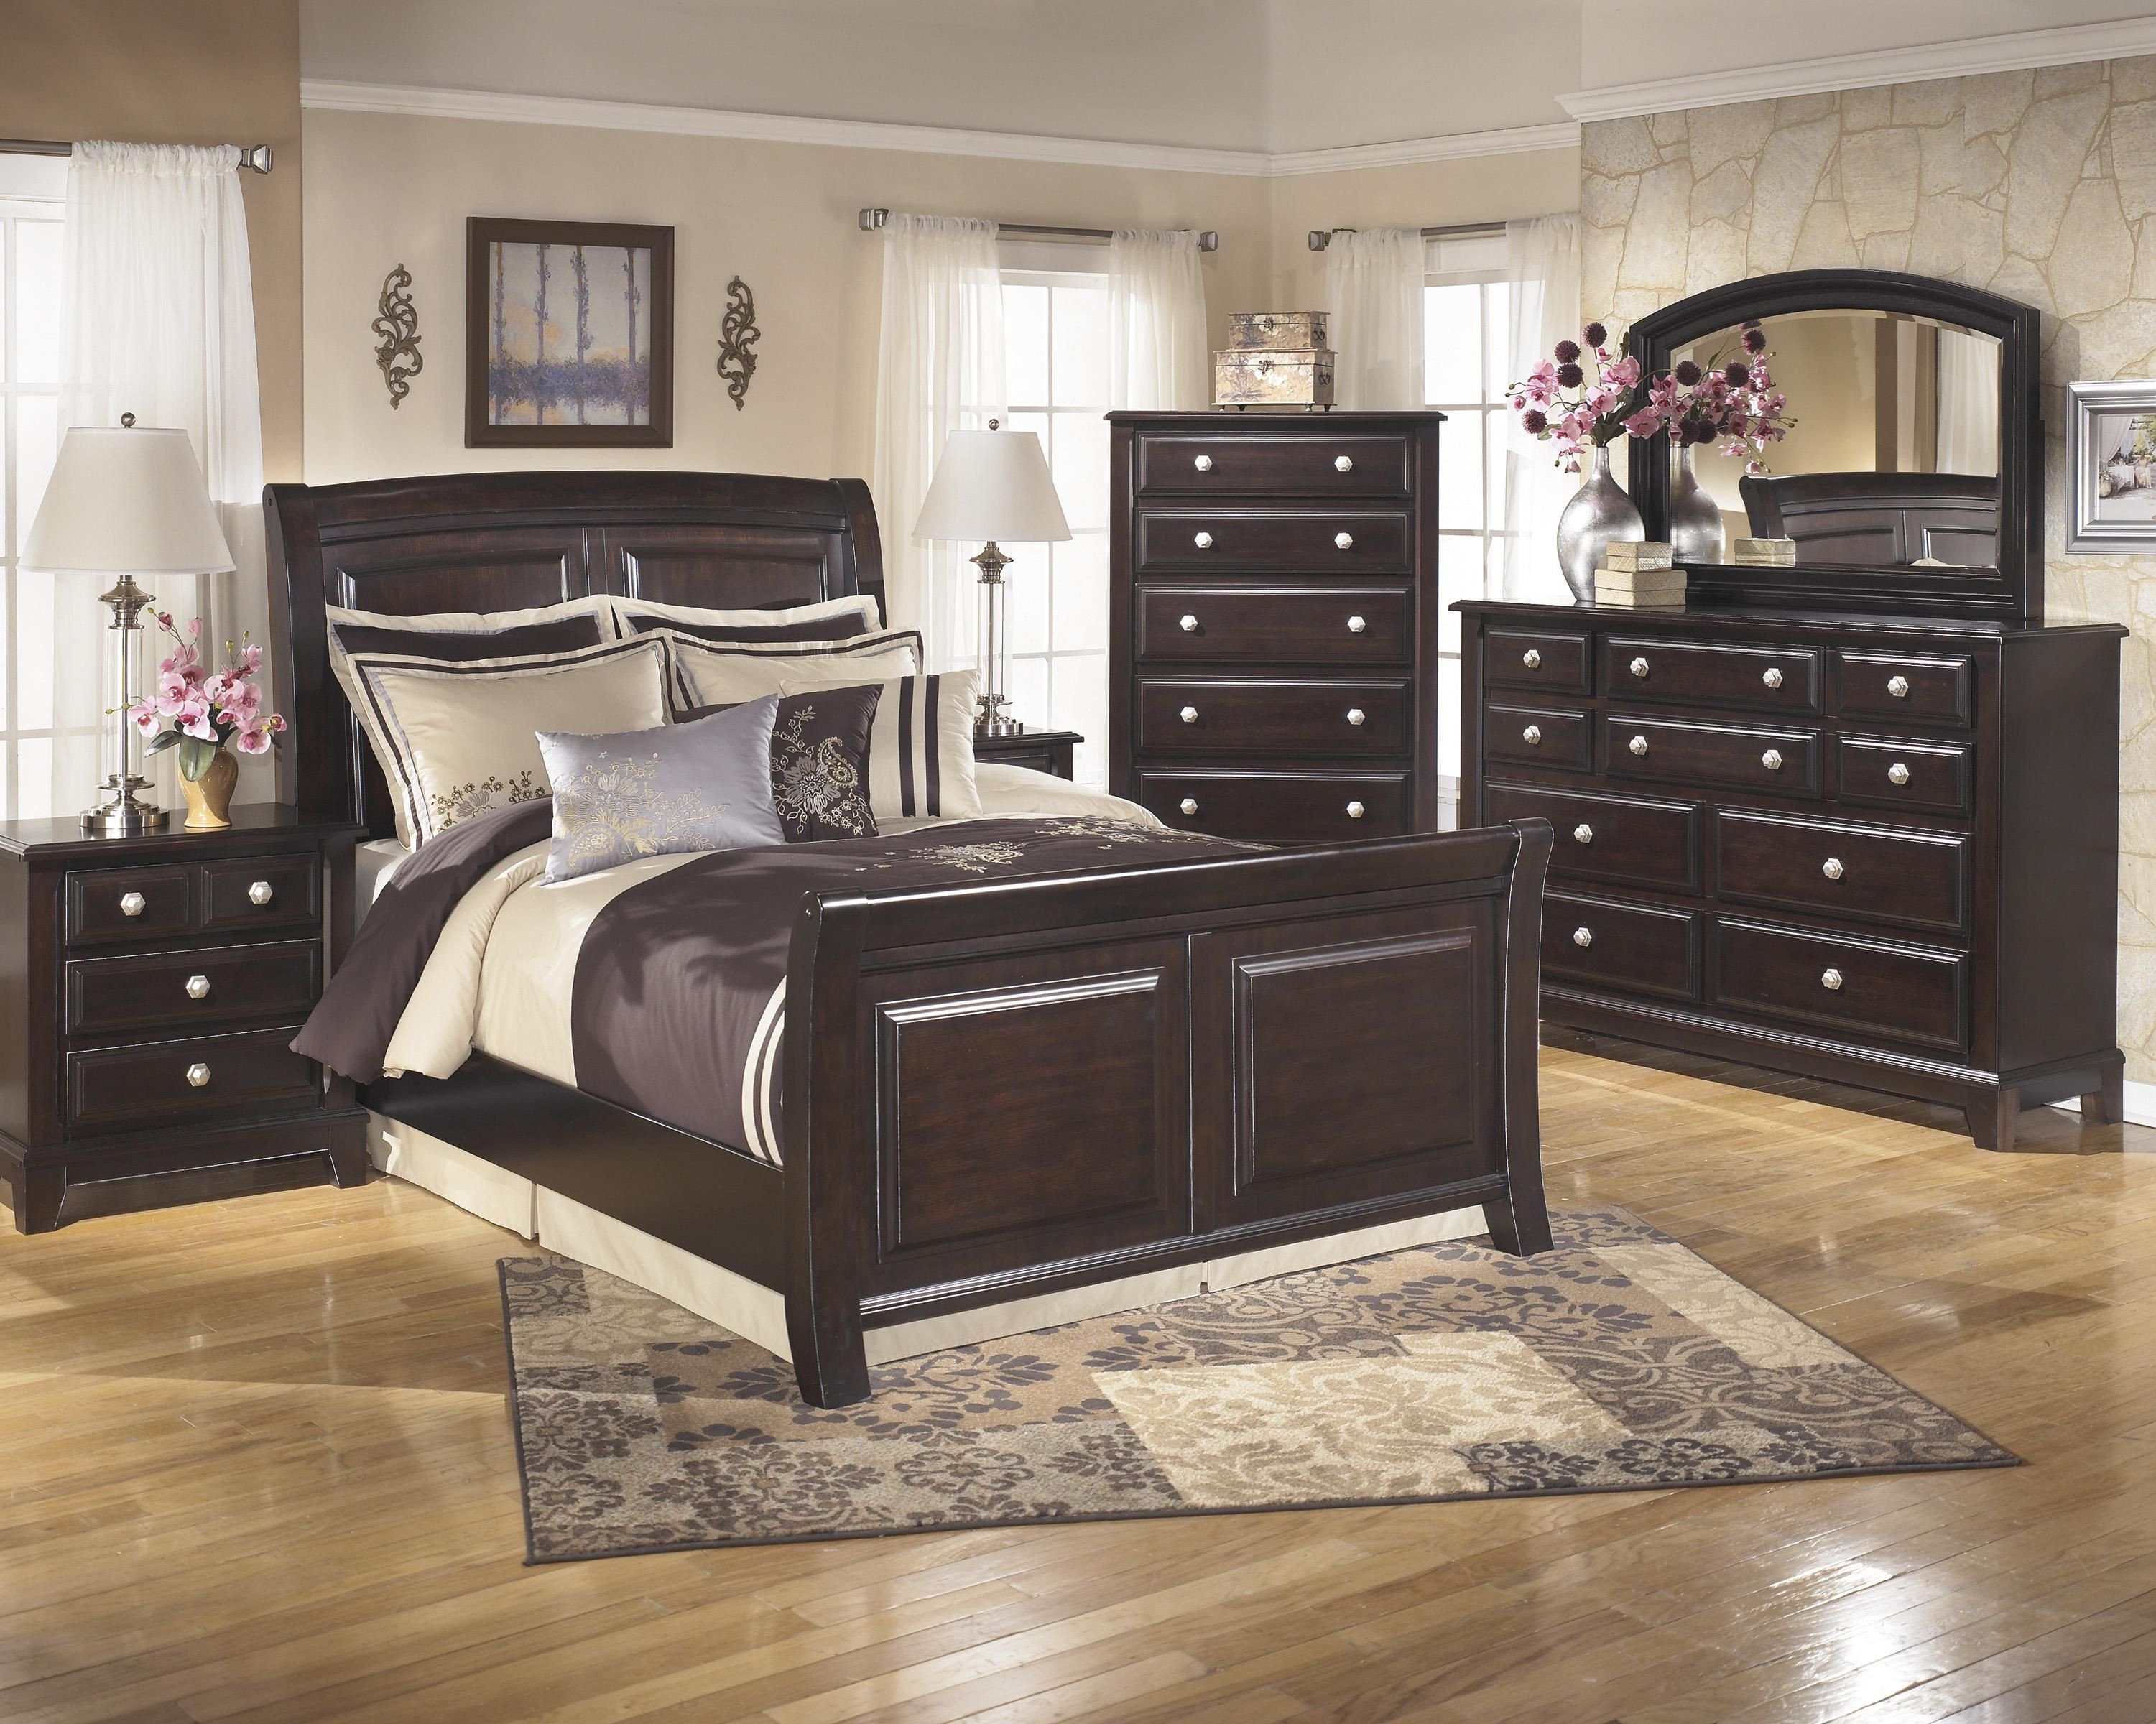 Grand Furniture Bedroom Set Unique Ridgley King Bedroom Group by Signature Design by ashley